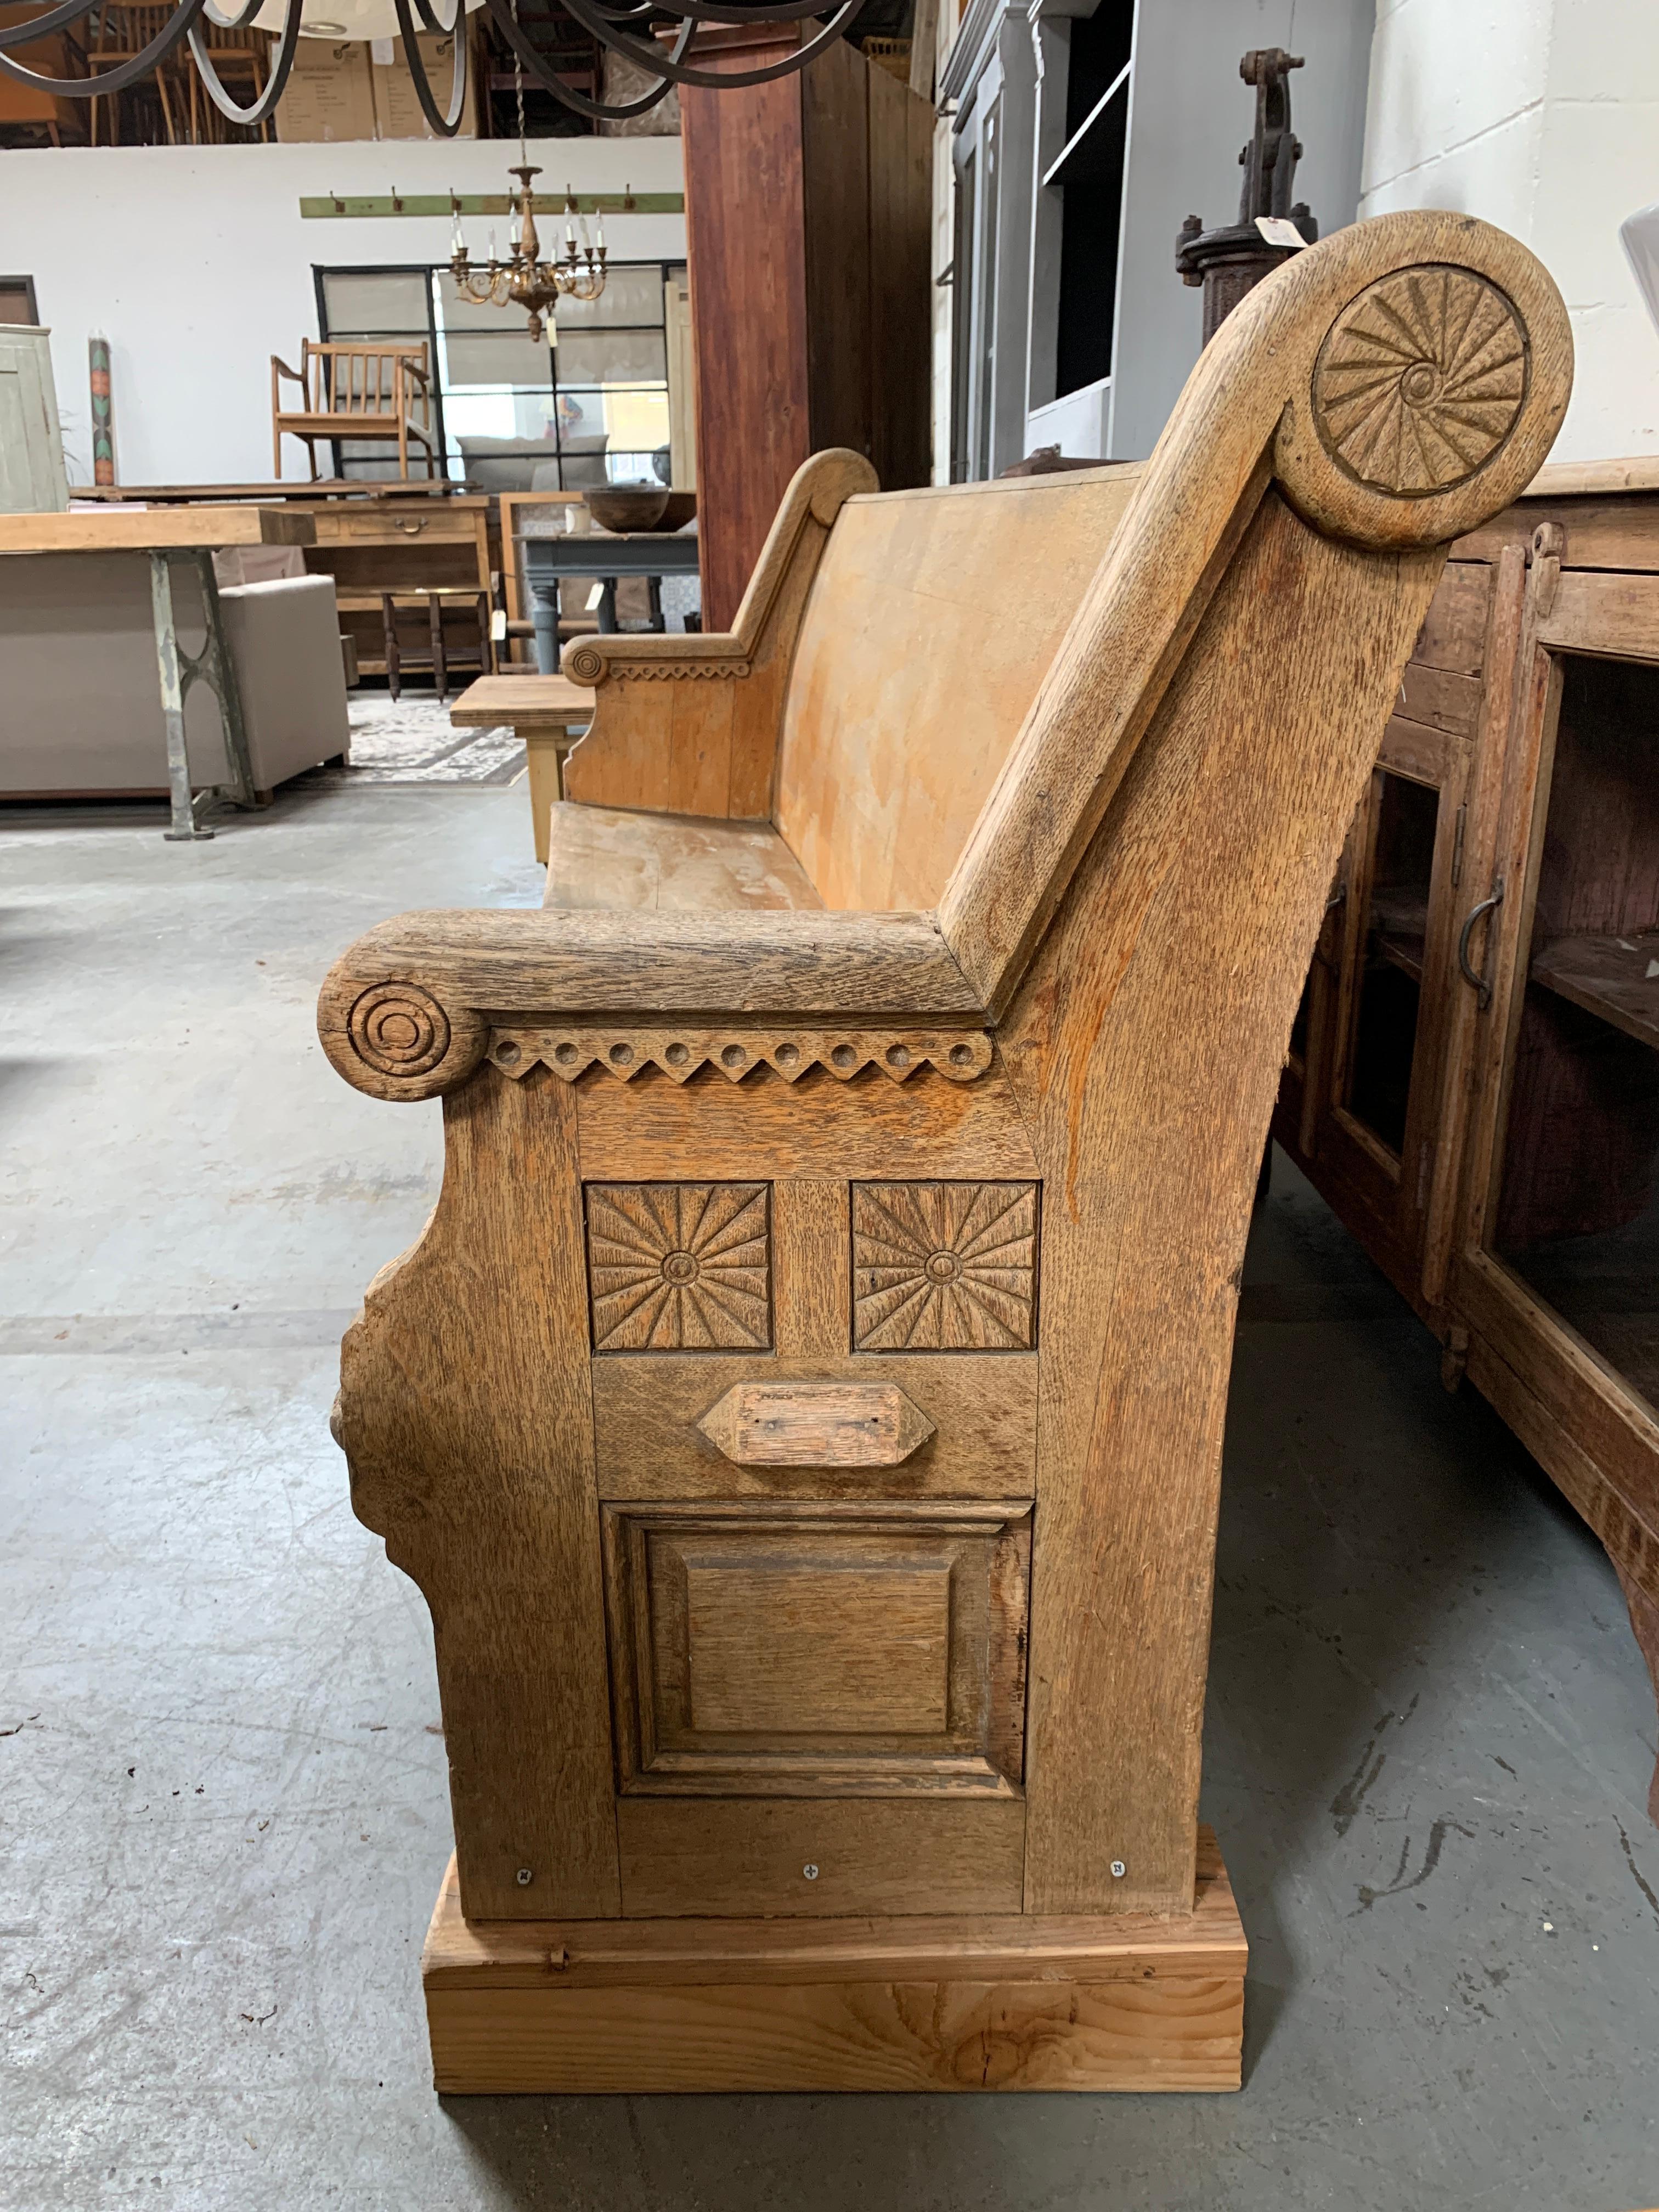 Genuine wooden church pew, featuring carved details on the arms. High, slightly arched back and lightly sloped seat showcase a piece designed for comfortable seating. Minor repair on right leg. 

Dimensions: 86